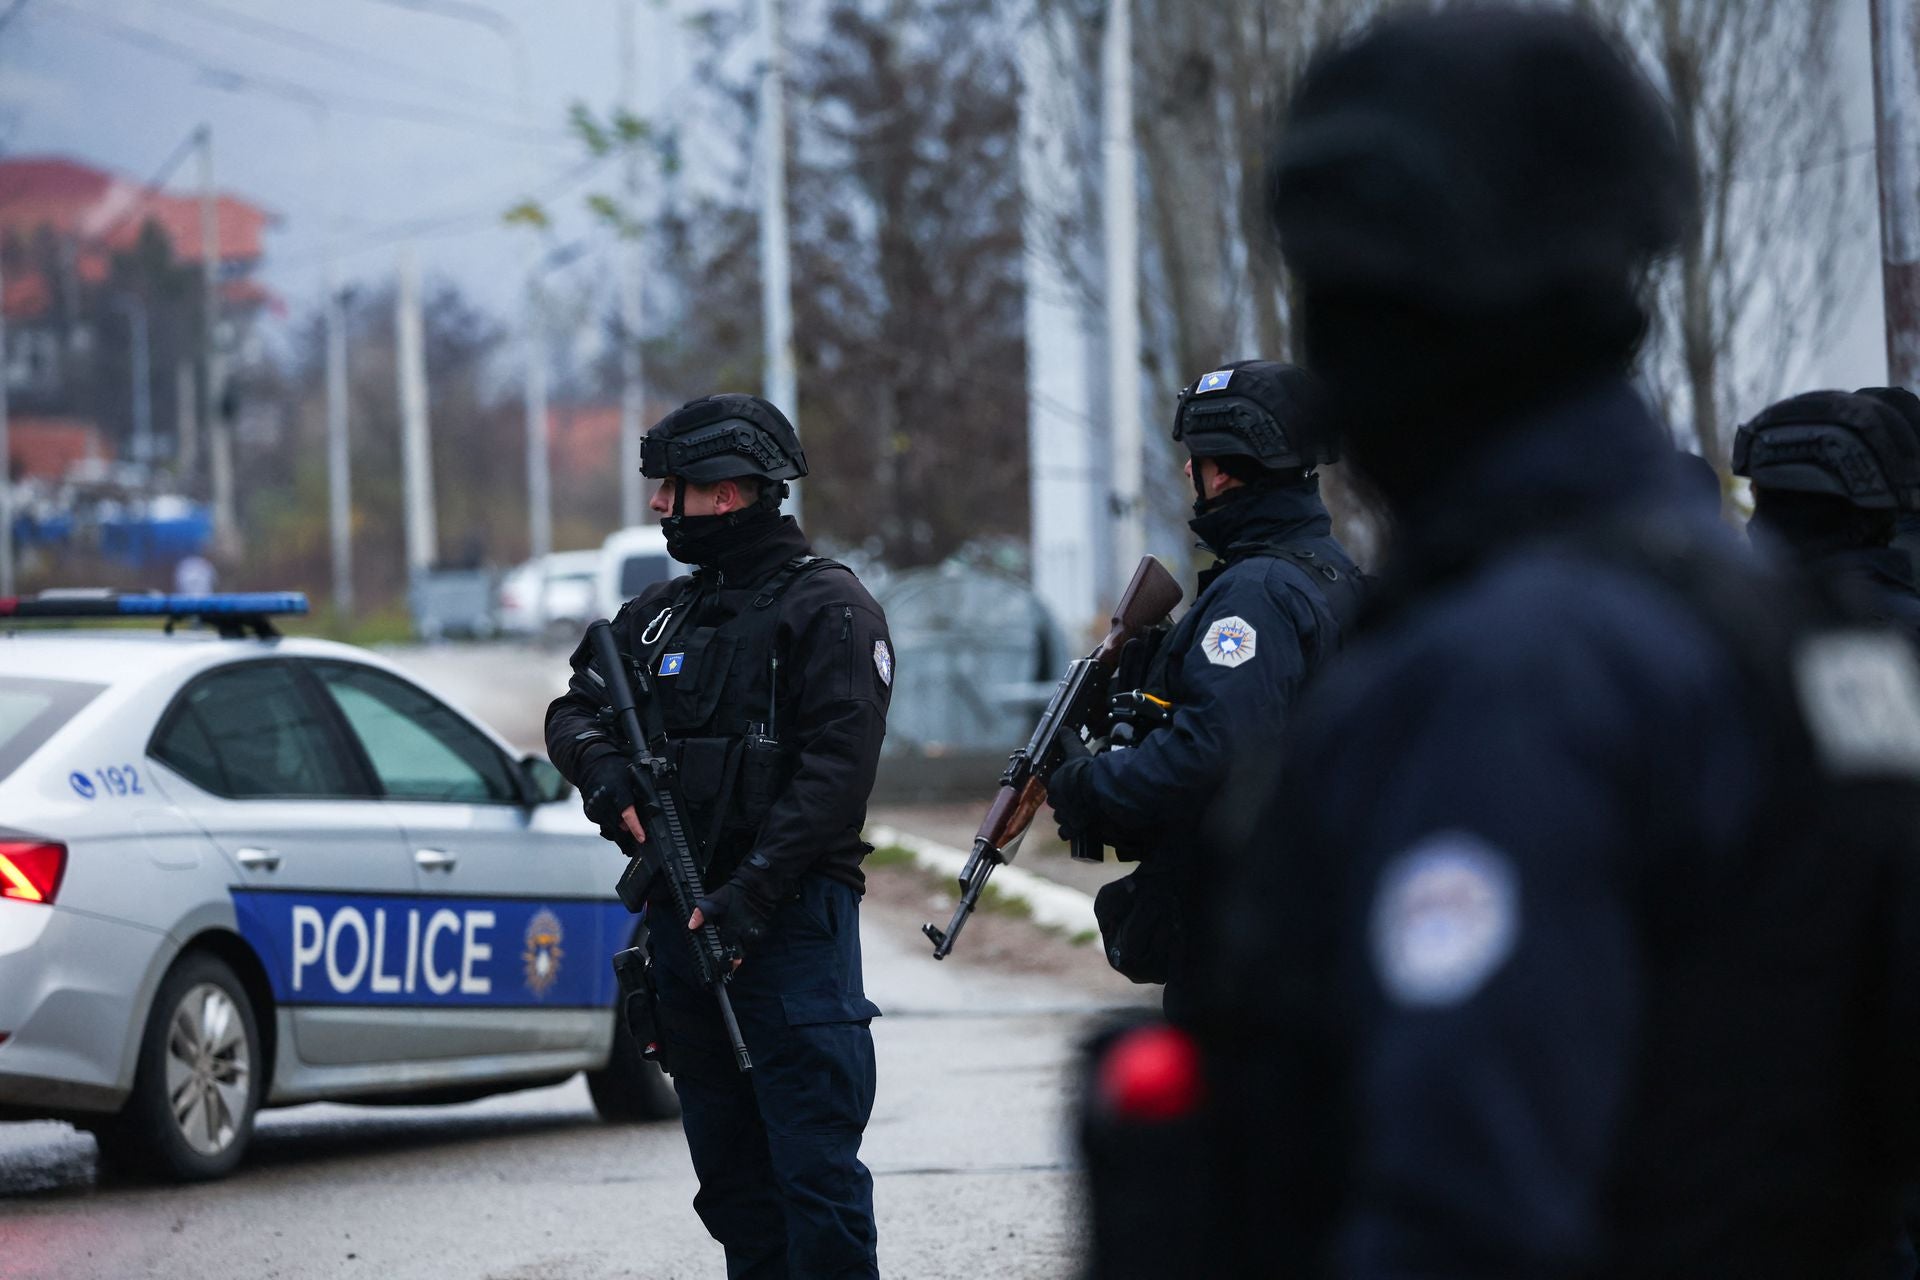 Kosovo police officers patrol an area in the northern part of the ethnically-divided town of Mitrovica, Kosovo